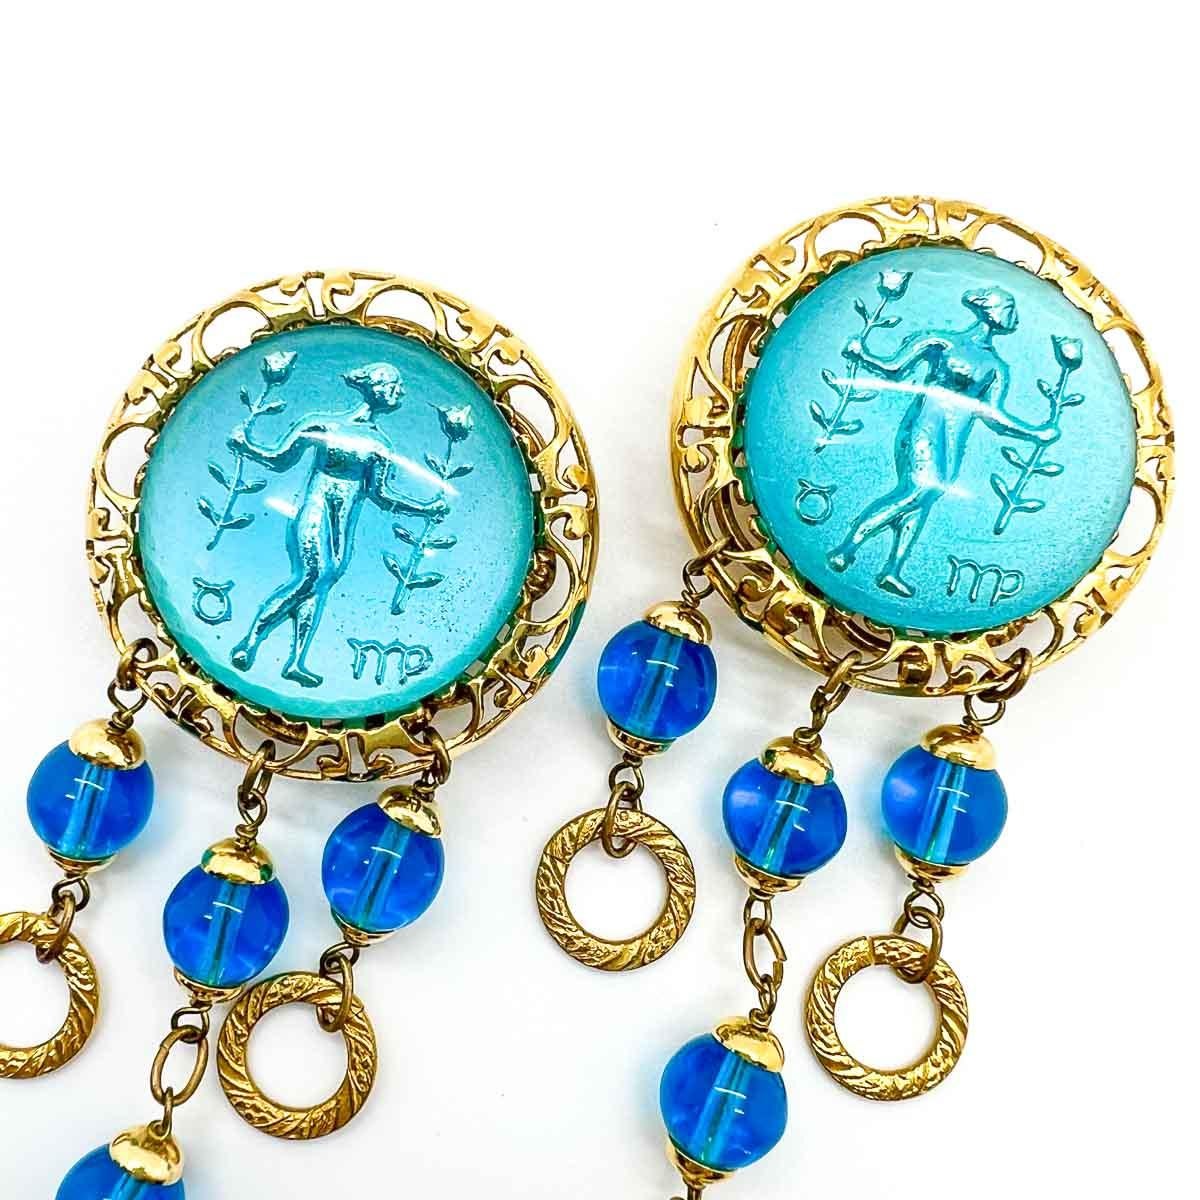 A spectacular pair of French Vintage Aqua Intaglio Earrings. Featuring a huge reverse carved convex glass intaglio. Dropping away are chased golden rings with matching deep turquoise blue balls. The backs of these earrings are as detailed and